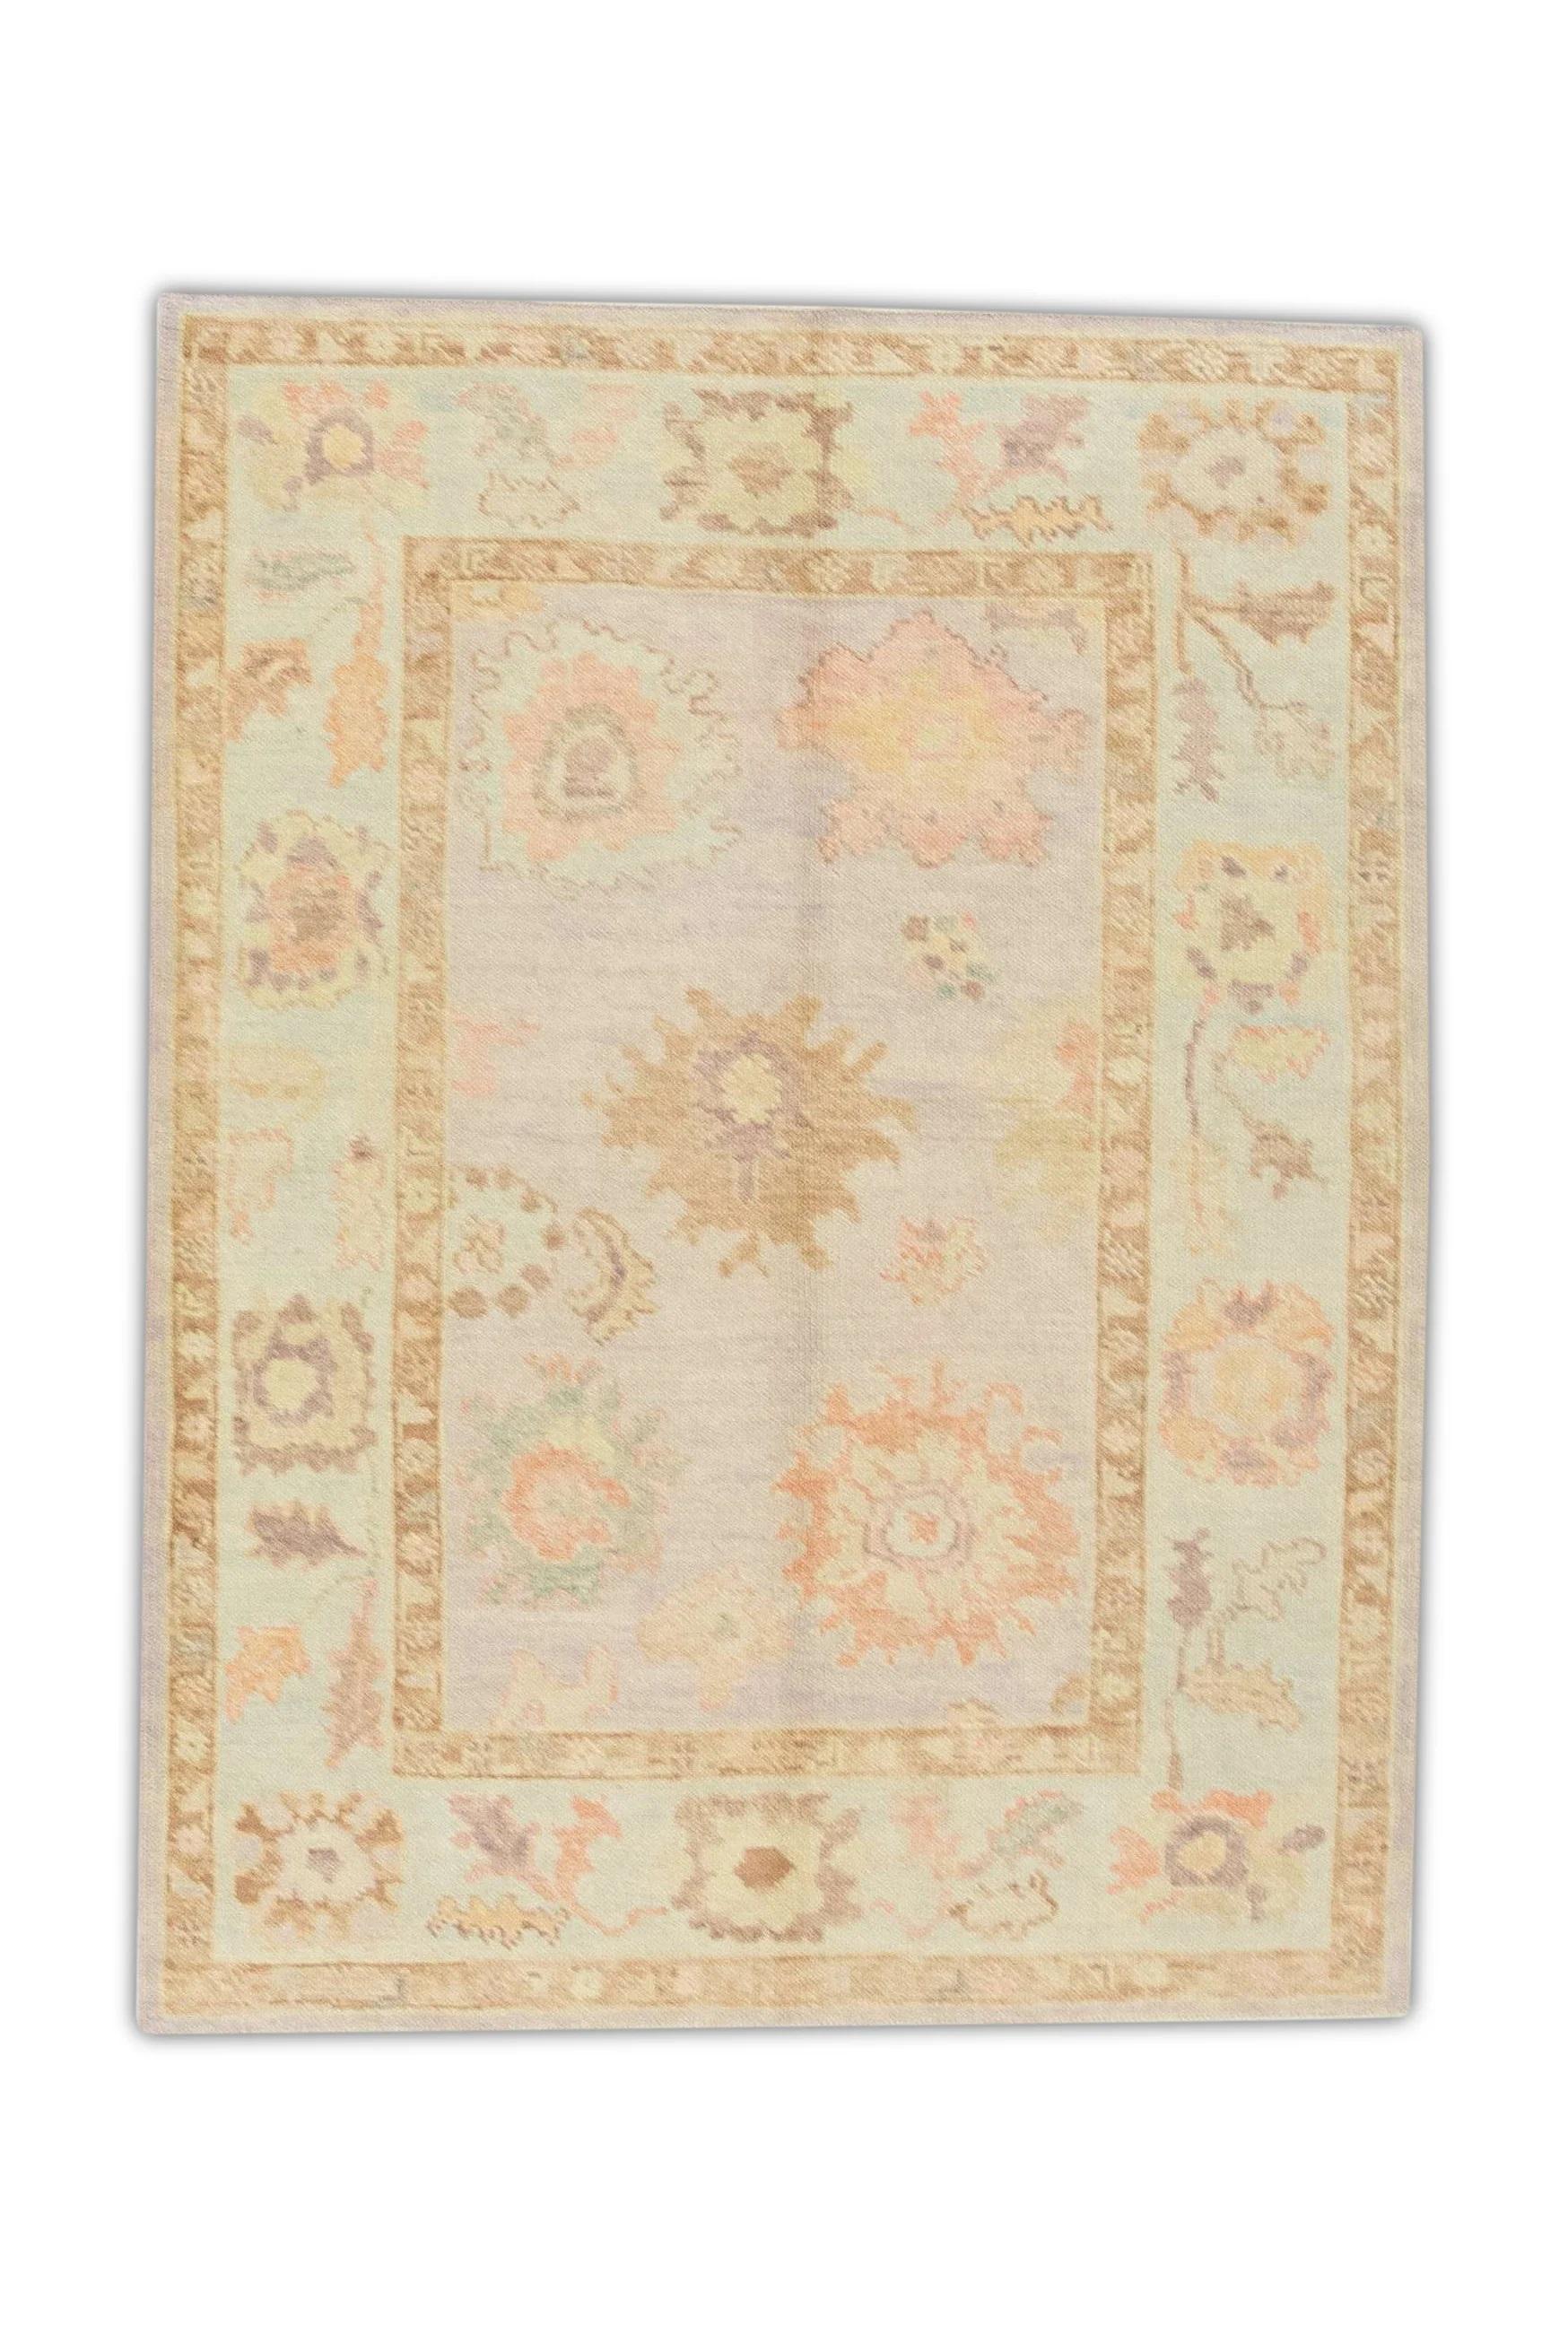 Contemporary Pink Multicolor Handwoven Wool Turkish Oushak Rug 4'3